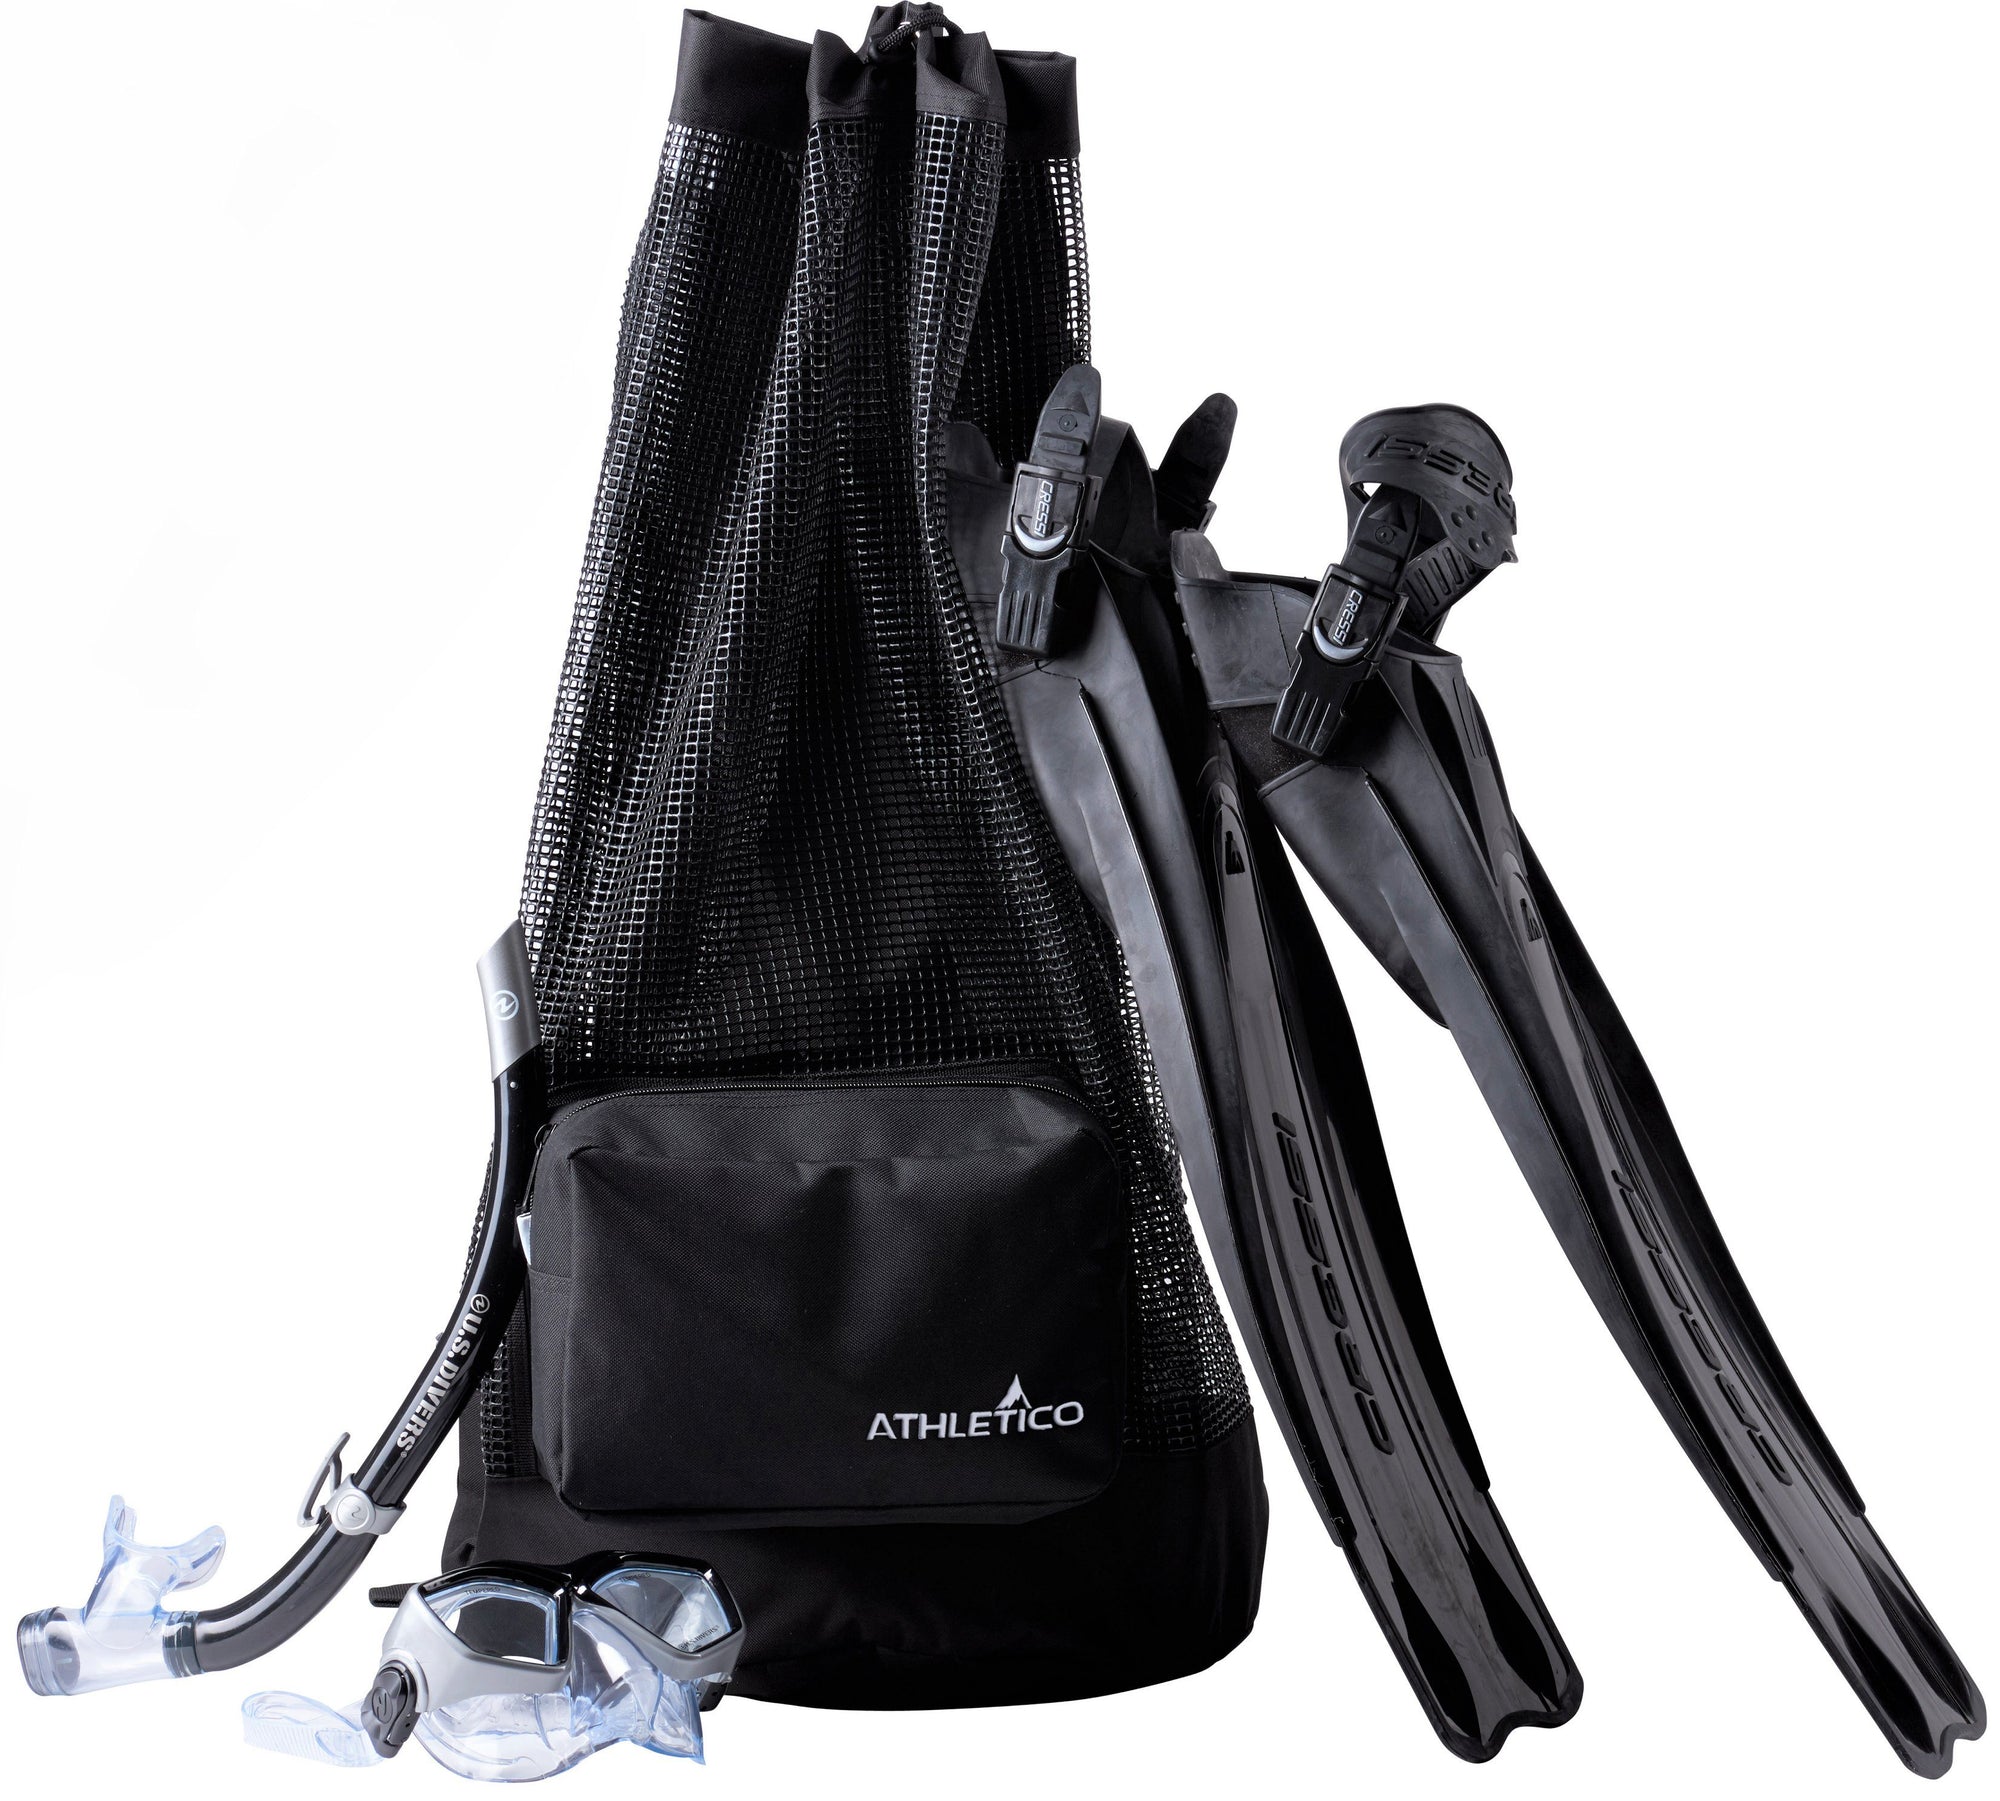 Athletico Scuba Diving Backpack - Athletico